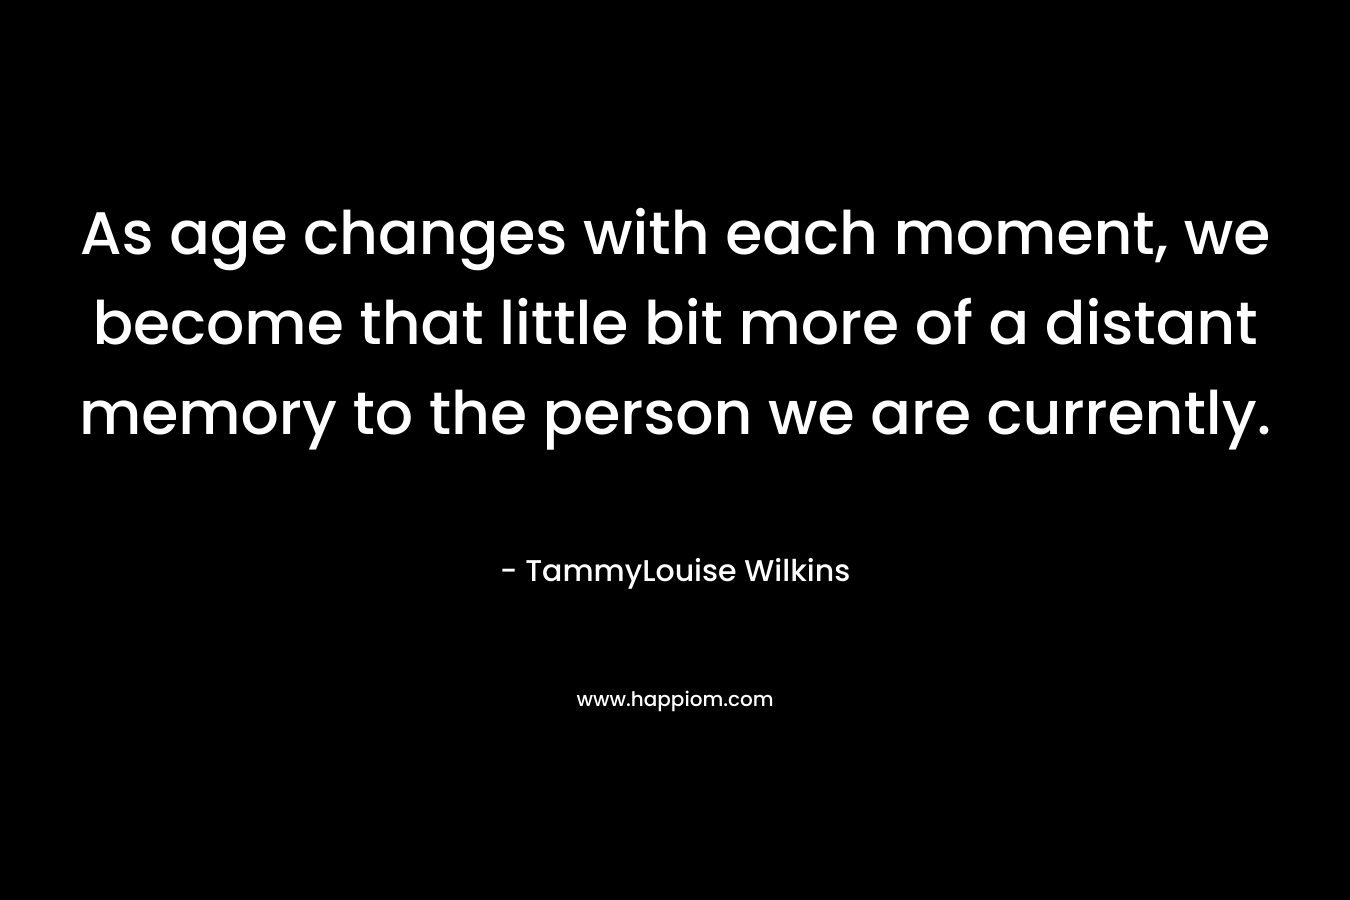 As age changes with each moment, we become that little bit more of a distant memory to the person we are currently.